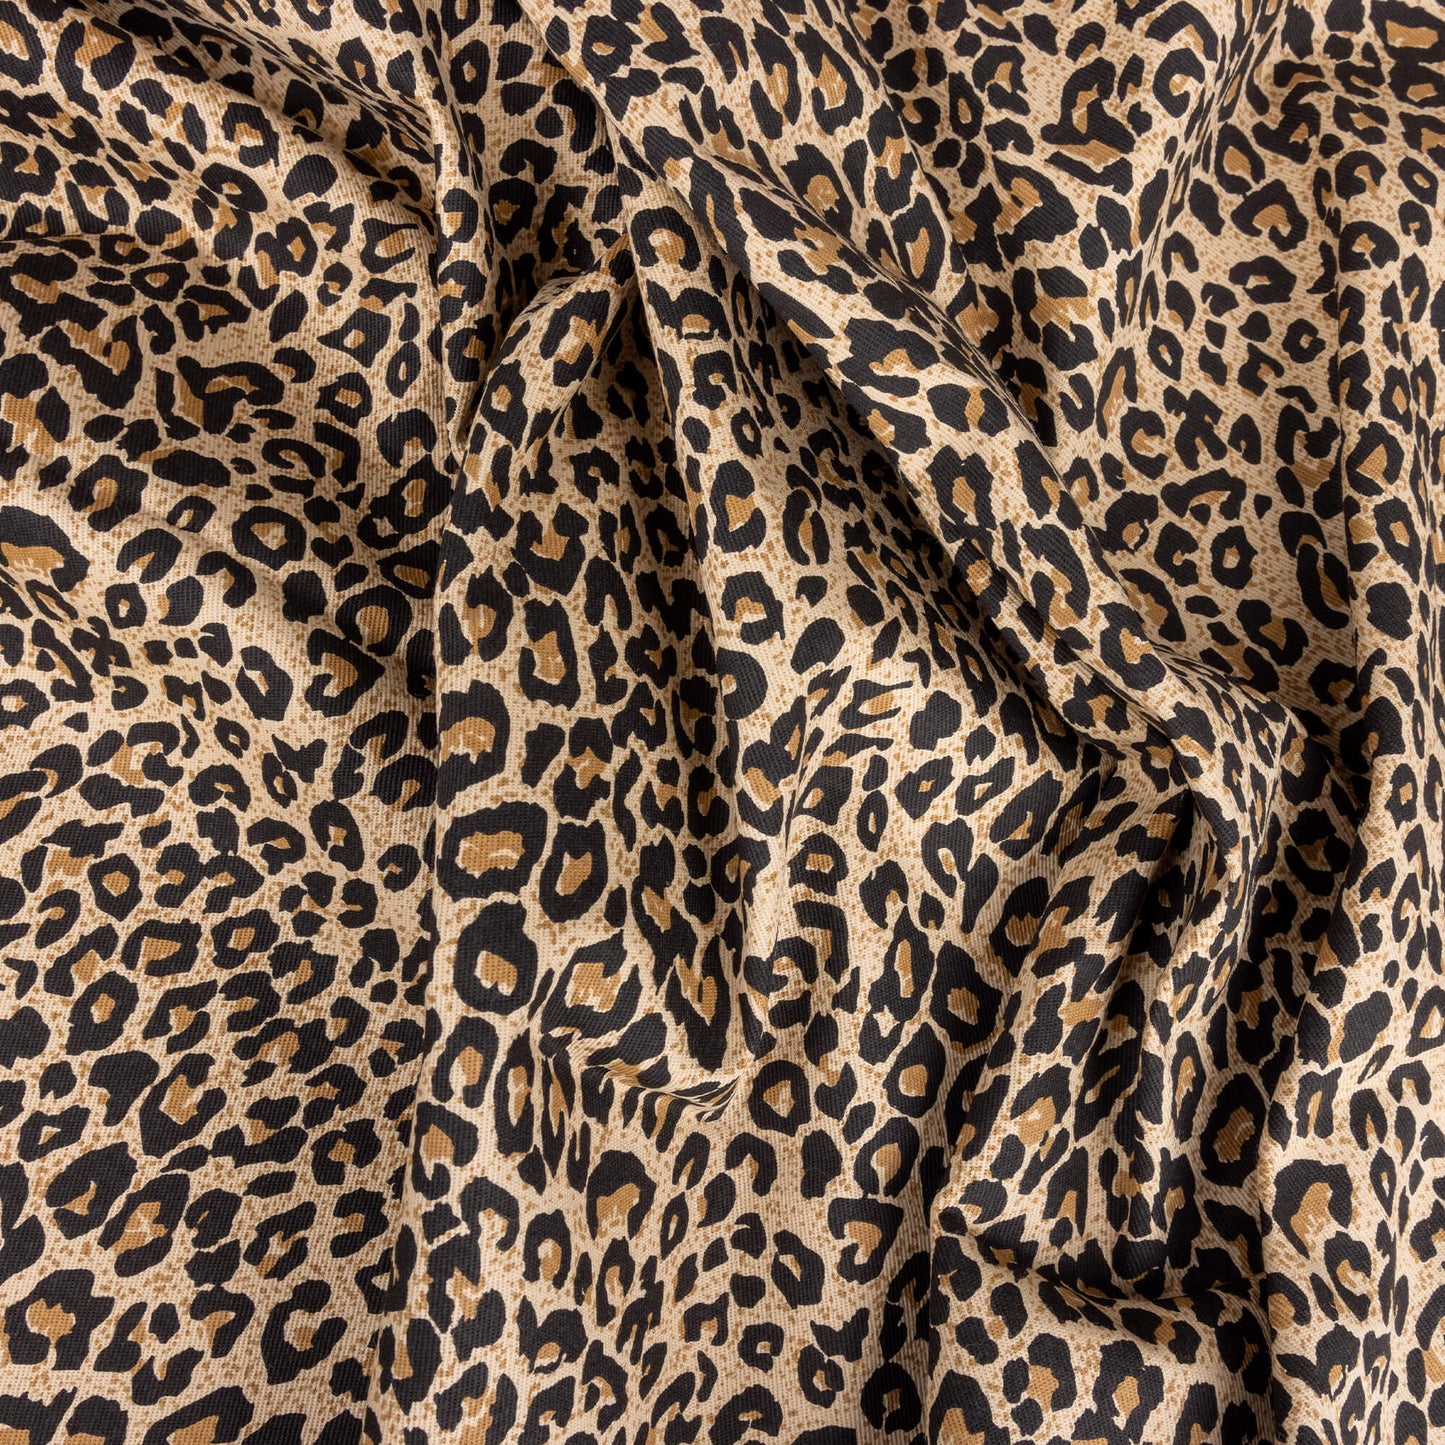 A close up of brown leopard print fabric with black, beige and a soft beige background the tones are warm the fabric is crumpled